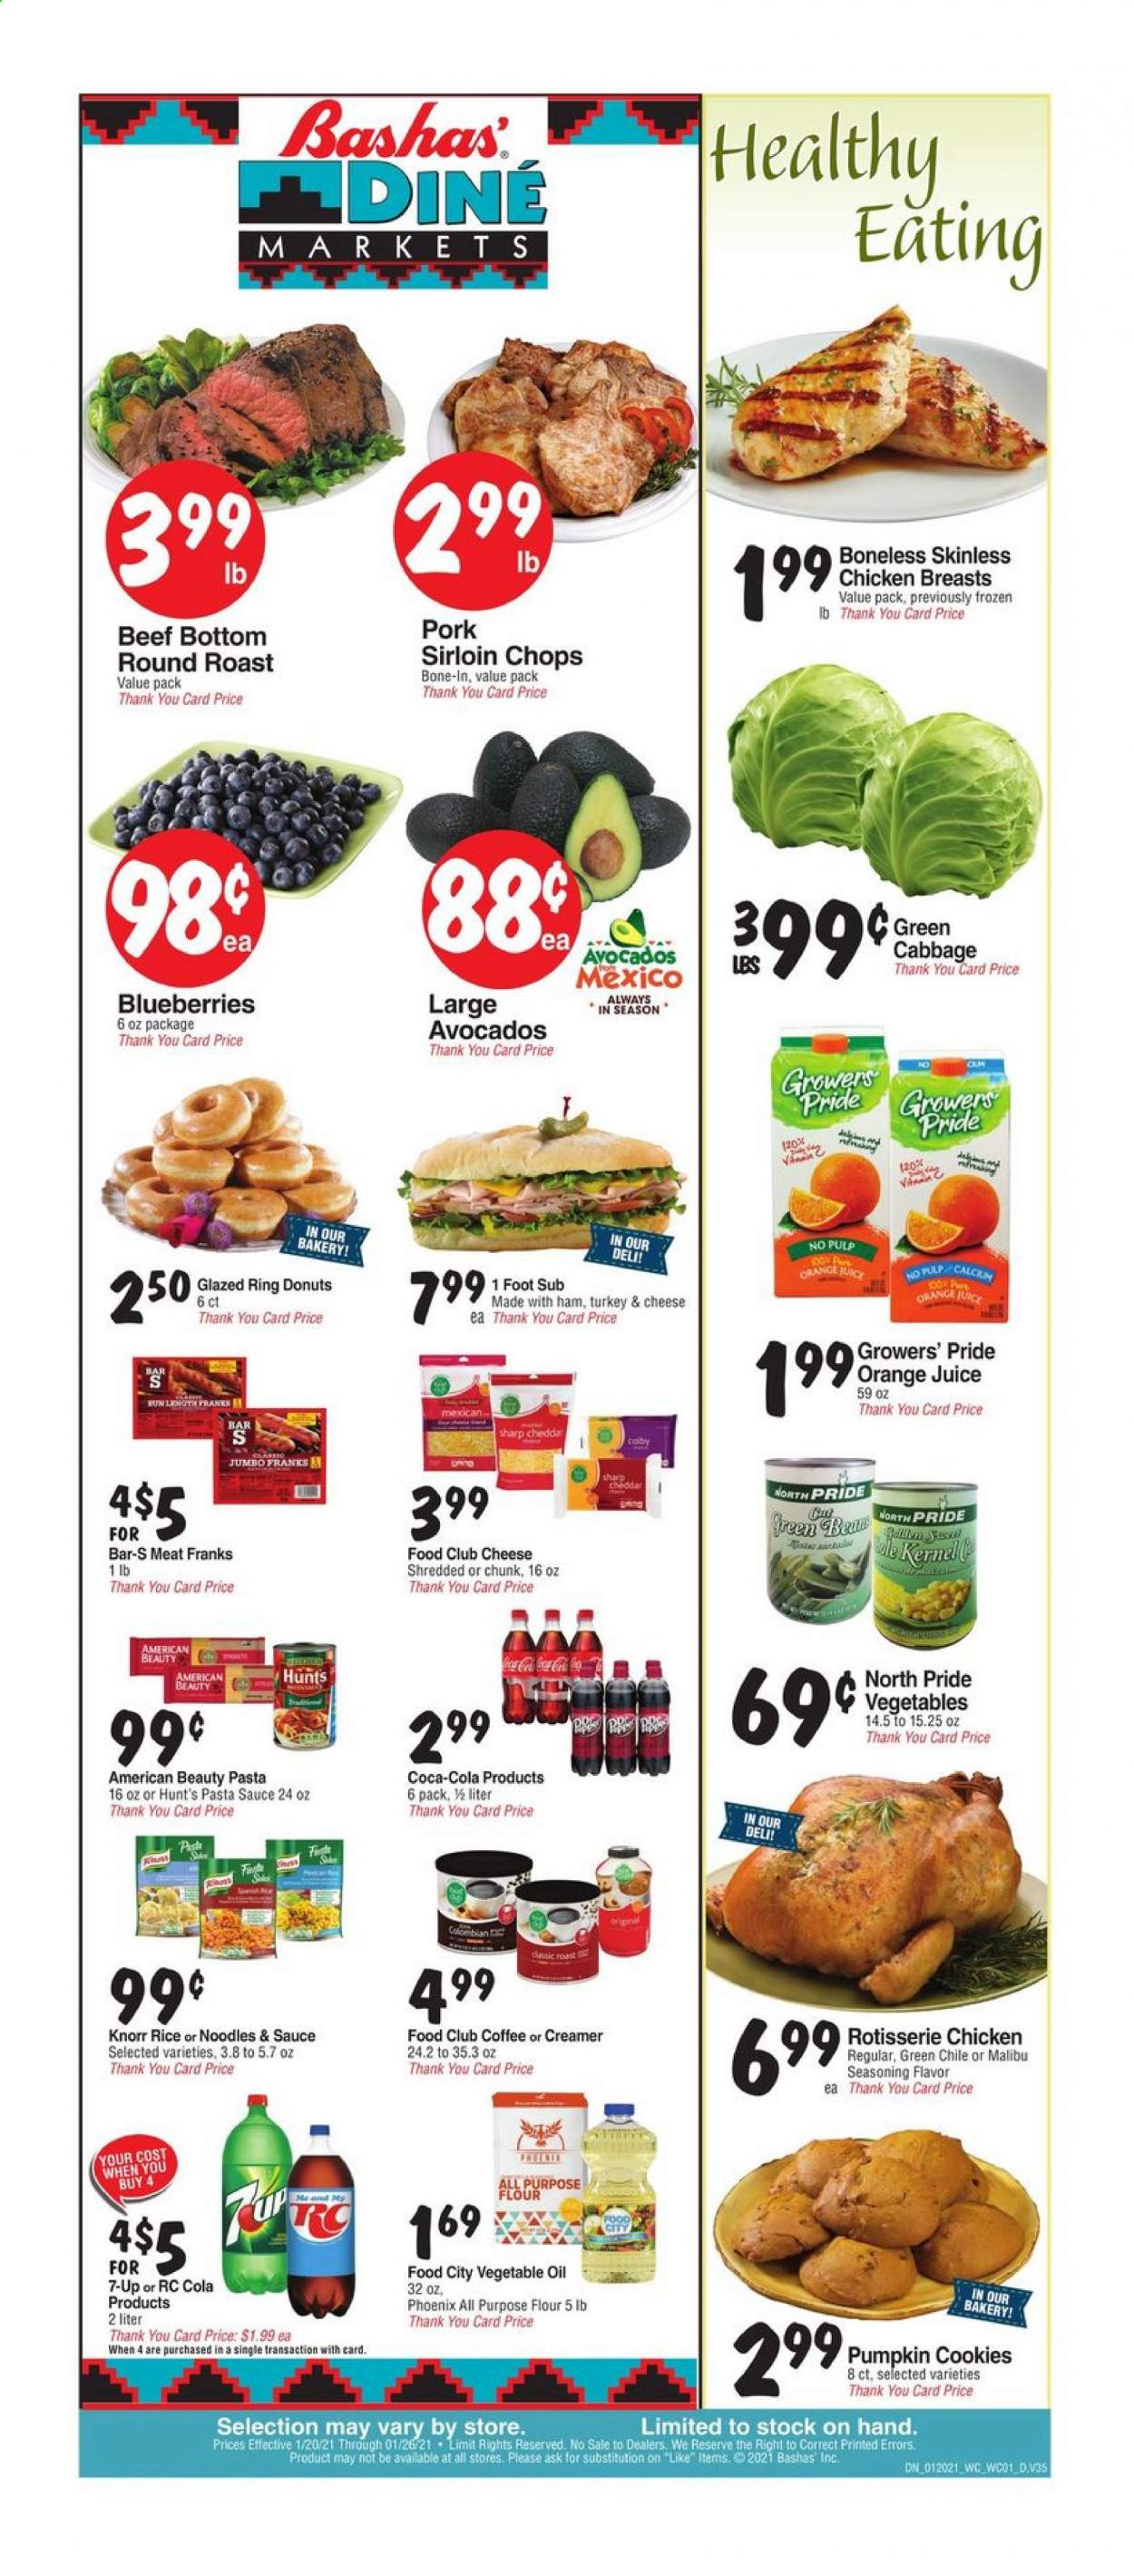 thumbnail - Bashas' Diné Markets Flyer - 01/20/2021 - 01/26/2021 - Sales products - blueberries, donut, Knorr, ham, Colby cheese, cheddar, creamer, beans, cookies, all purpose flour, flour, noodles, pasta sauce, vegetable oil, Coca-Cola, orange juice, juice, 7UP, coffee, Malibu, chicken breasts, beef meat, round roast, avocado. Page 1.